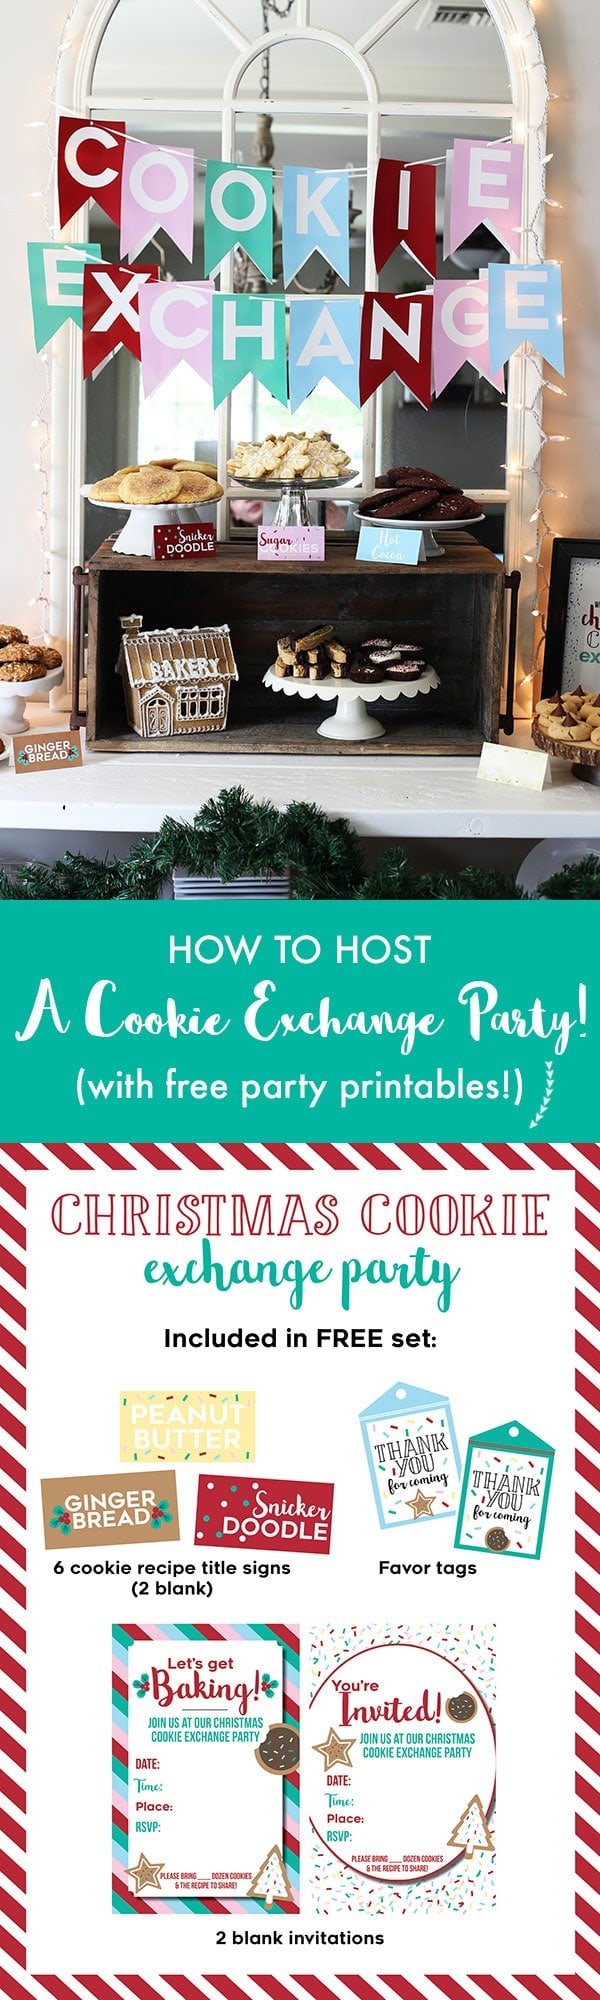 How to Host a Christmas Cookie Exchange Party, with a FREE set of party printables!